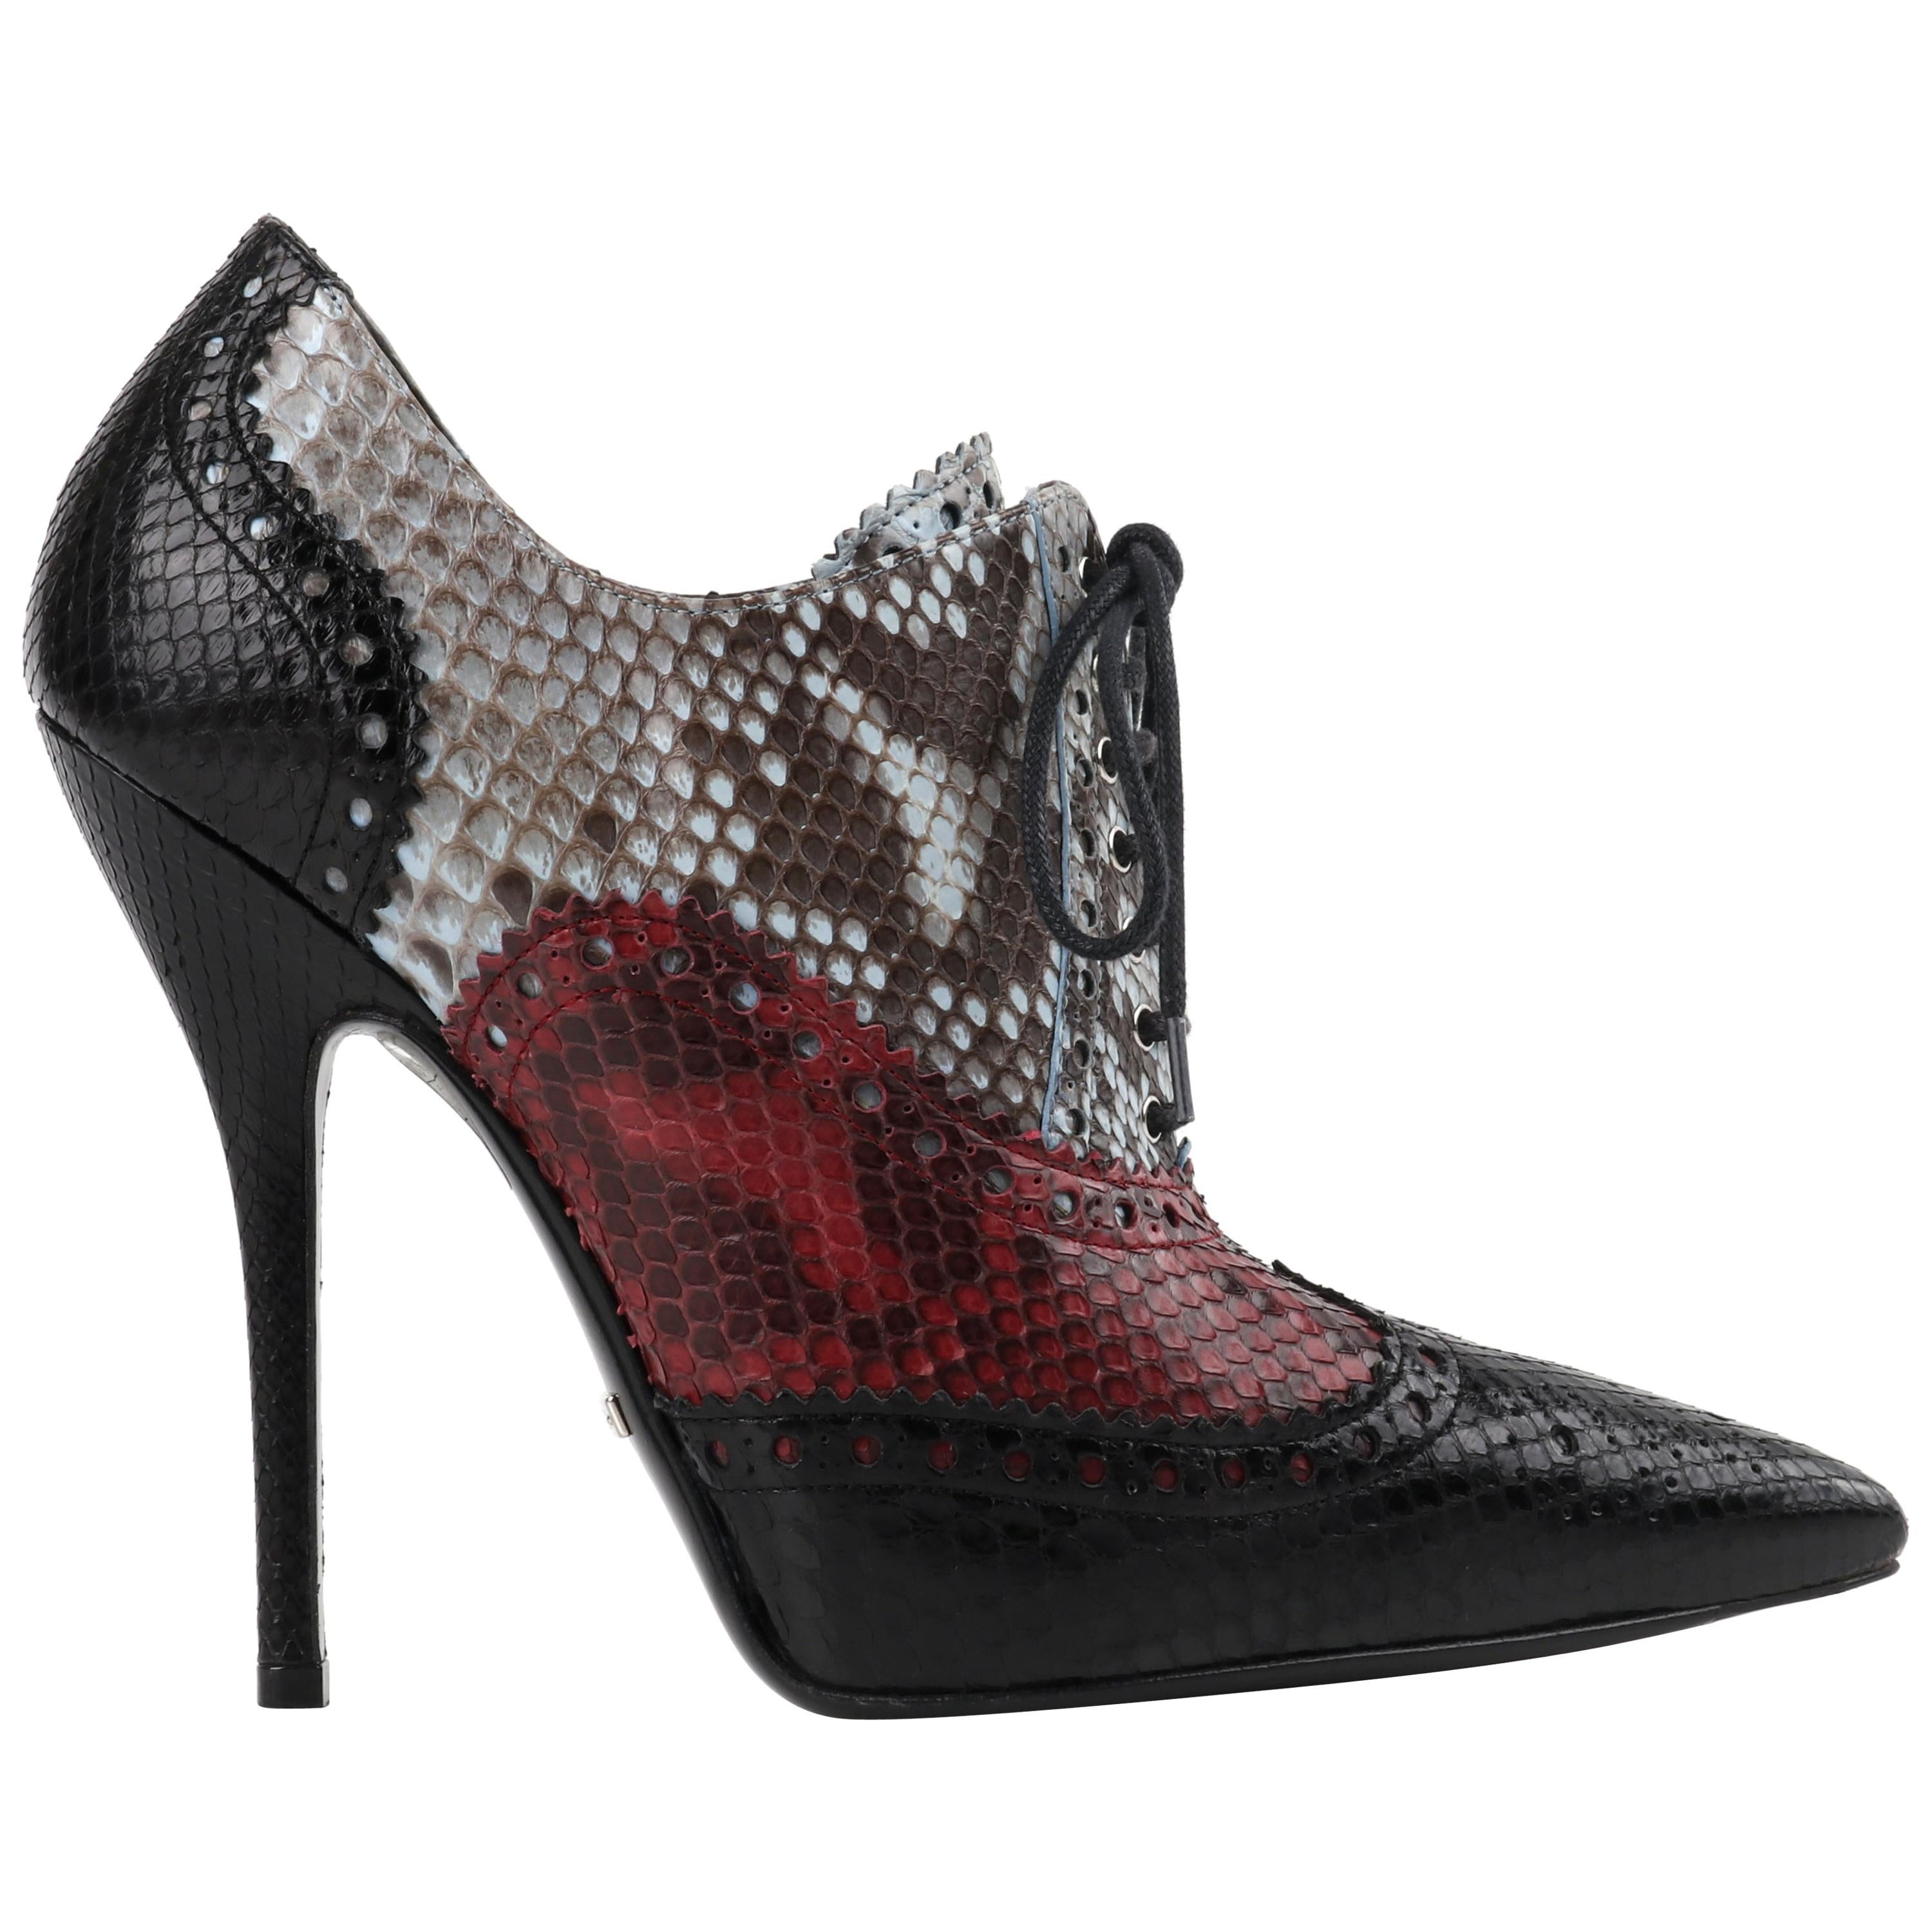 GUCCI "Gia" Multicolor Python Skin Leather Brogue Stiletto Ankle Boots Heels